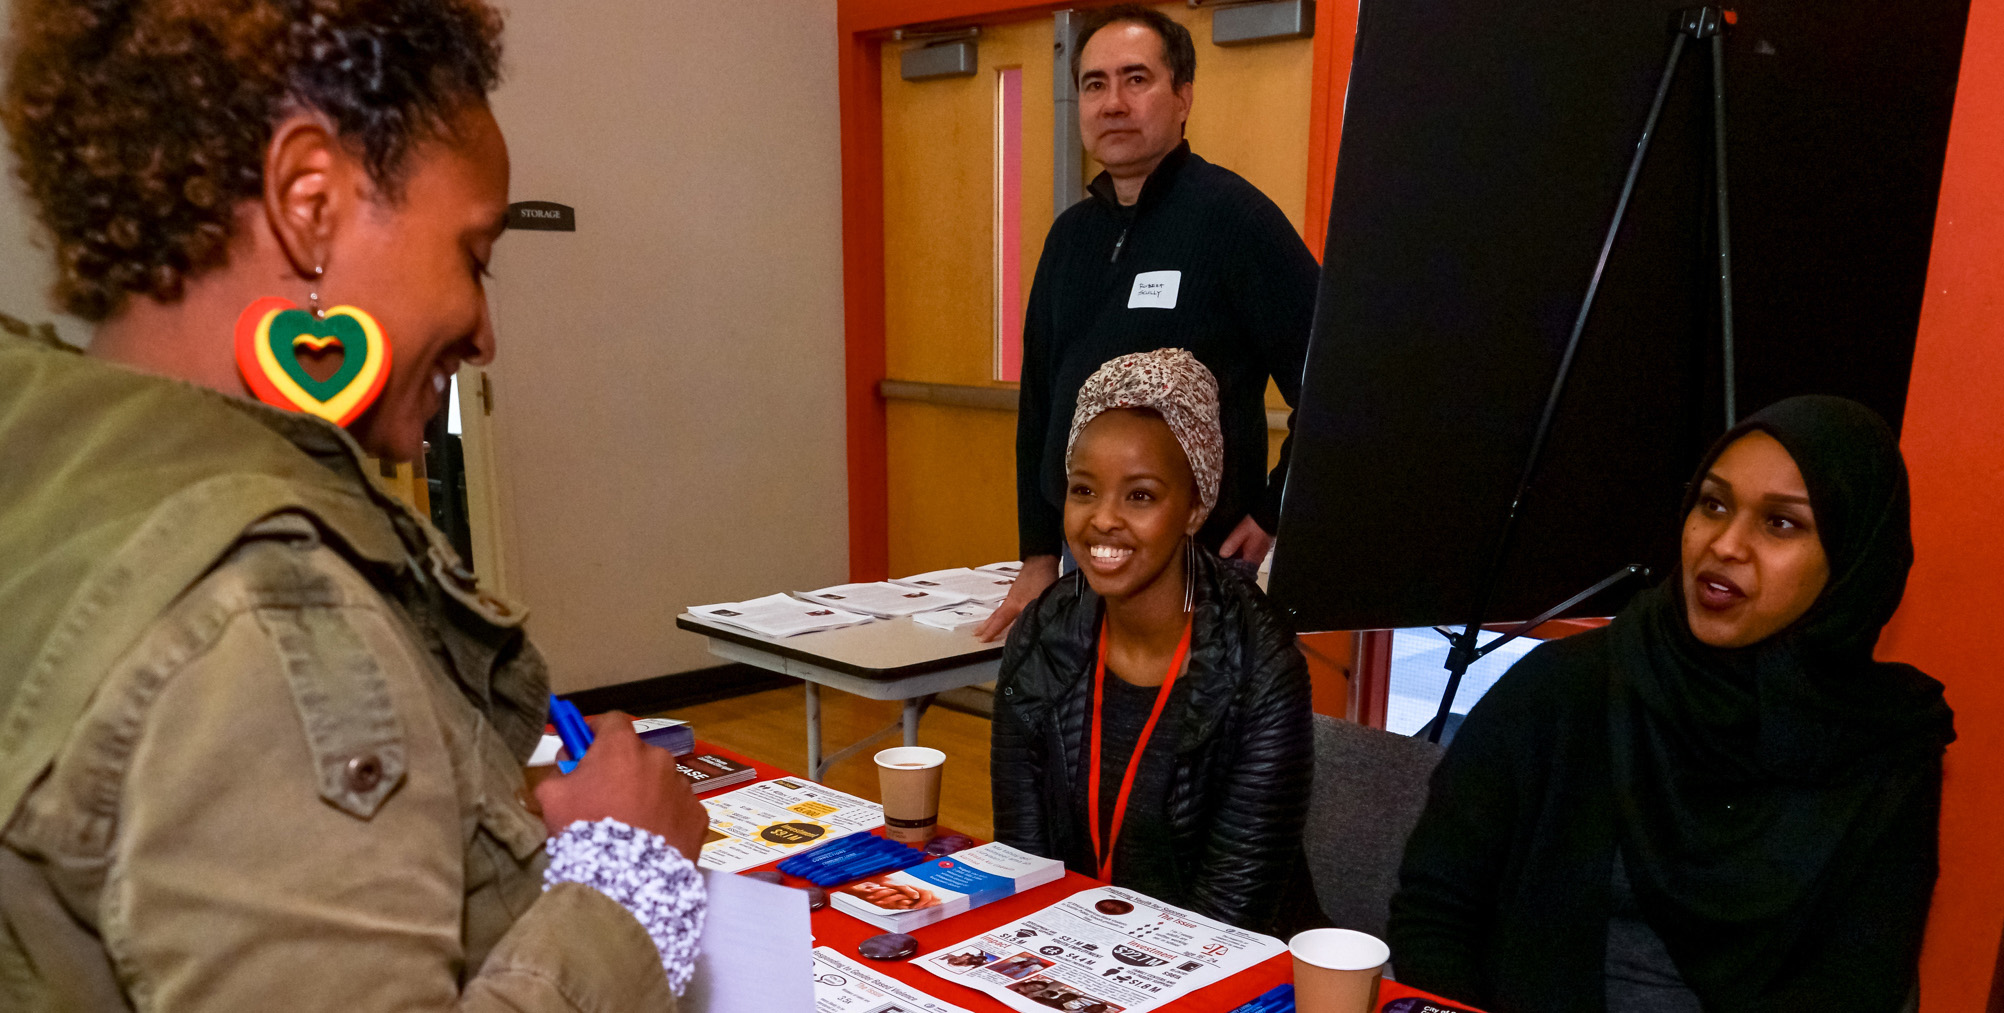 Two young Black women, one wearing a head scarf and the other wearing a hijab are sitting behind a table inside of a room talking to a Black community member who is smiling as she looks at the resources available on top of the table.